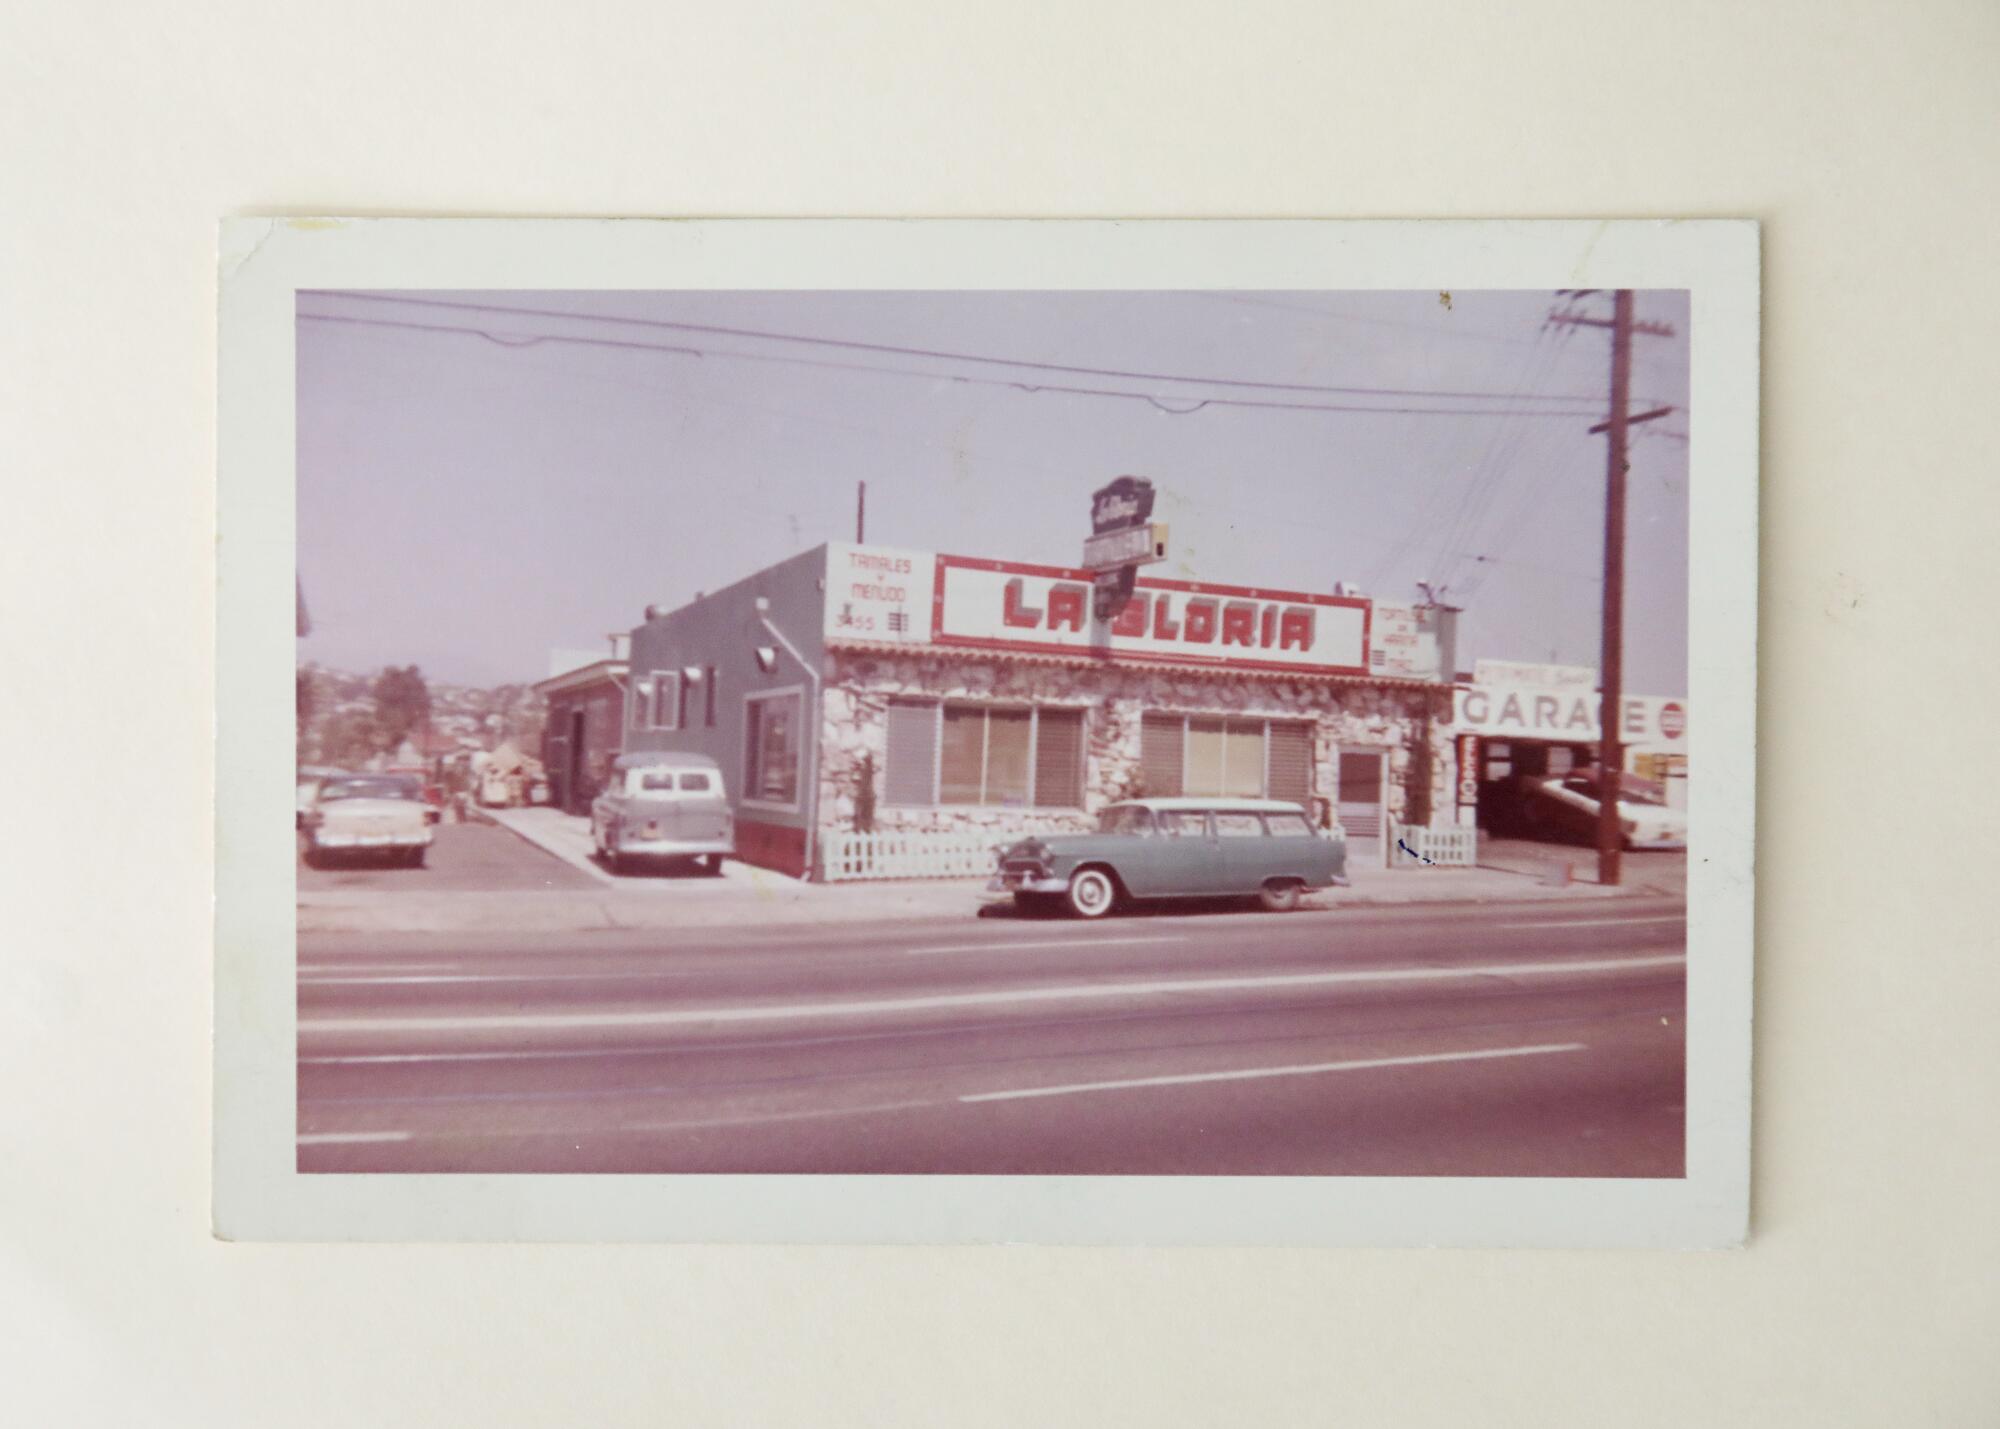 A 1960s photo shows the exterior of a building with the sign "La Gloria"